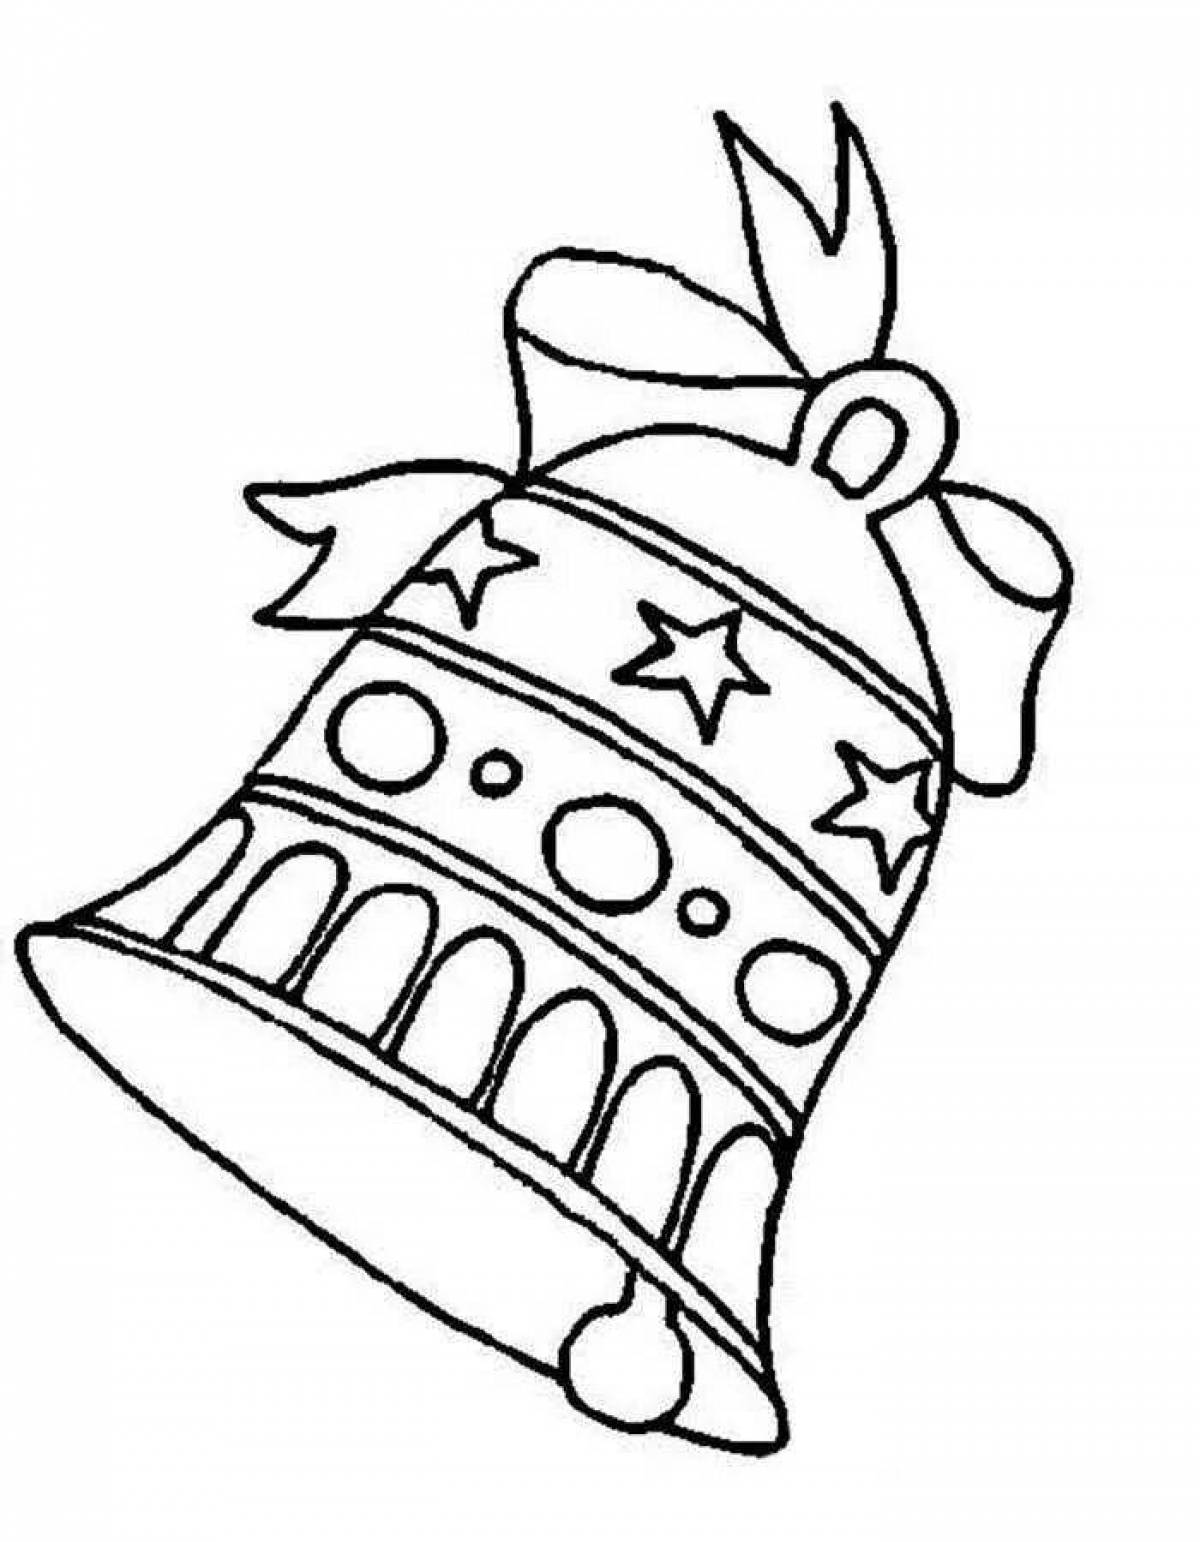 Christmas bell coloring page